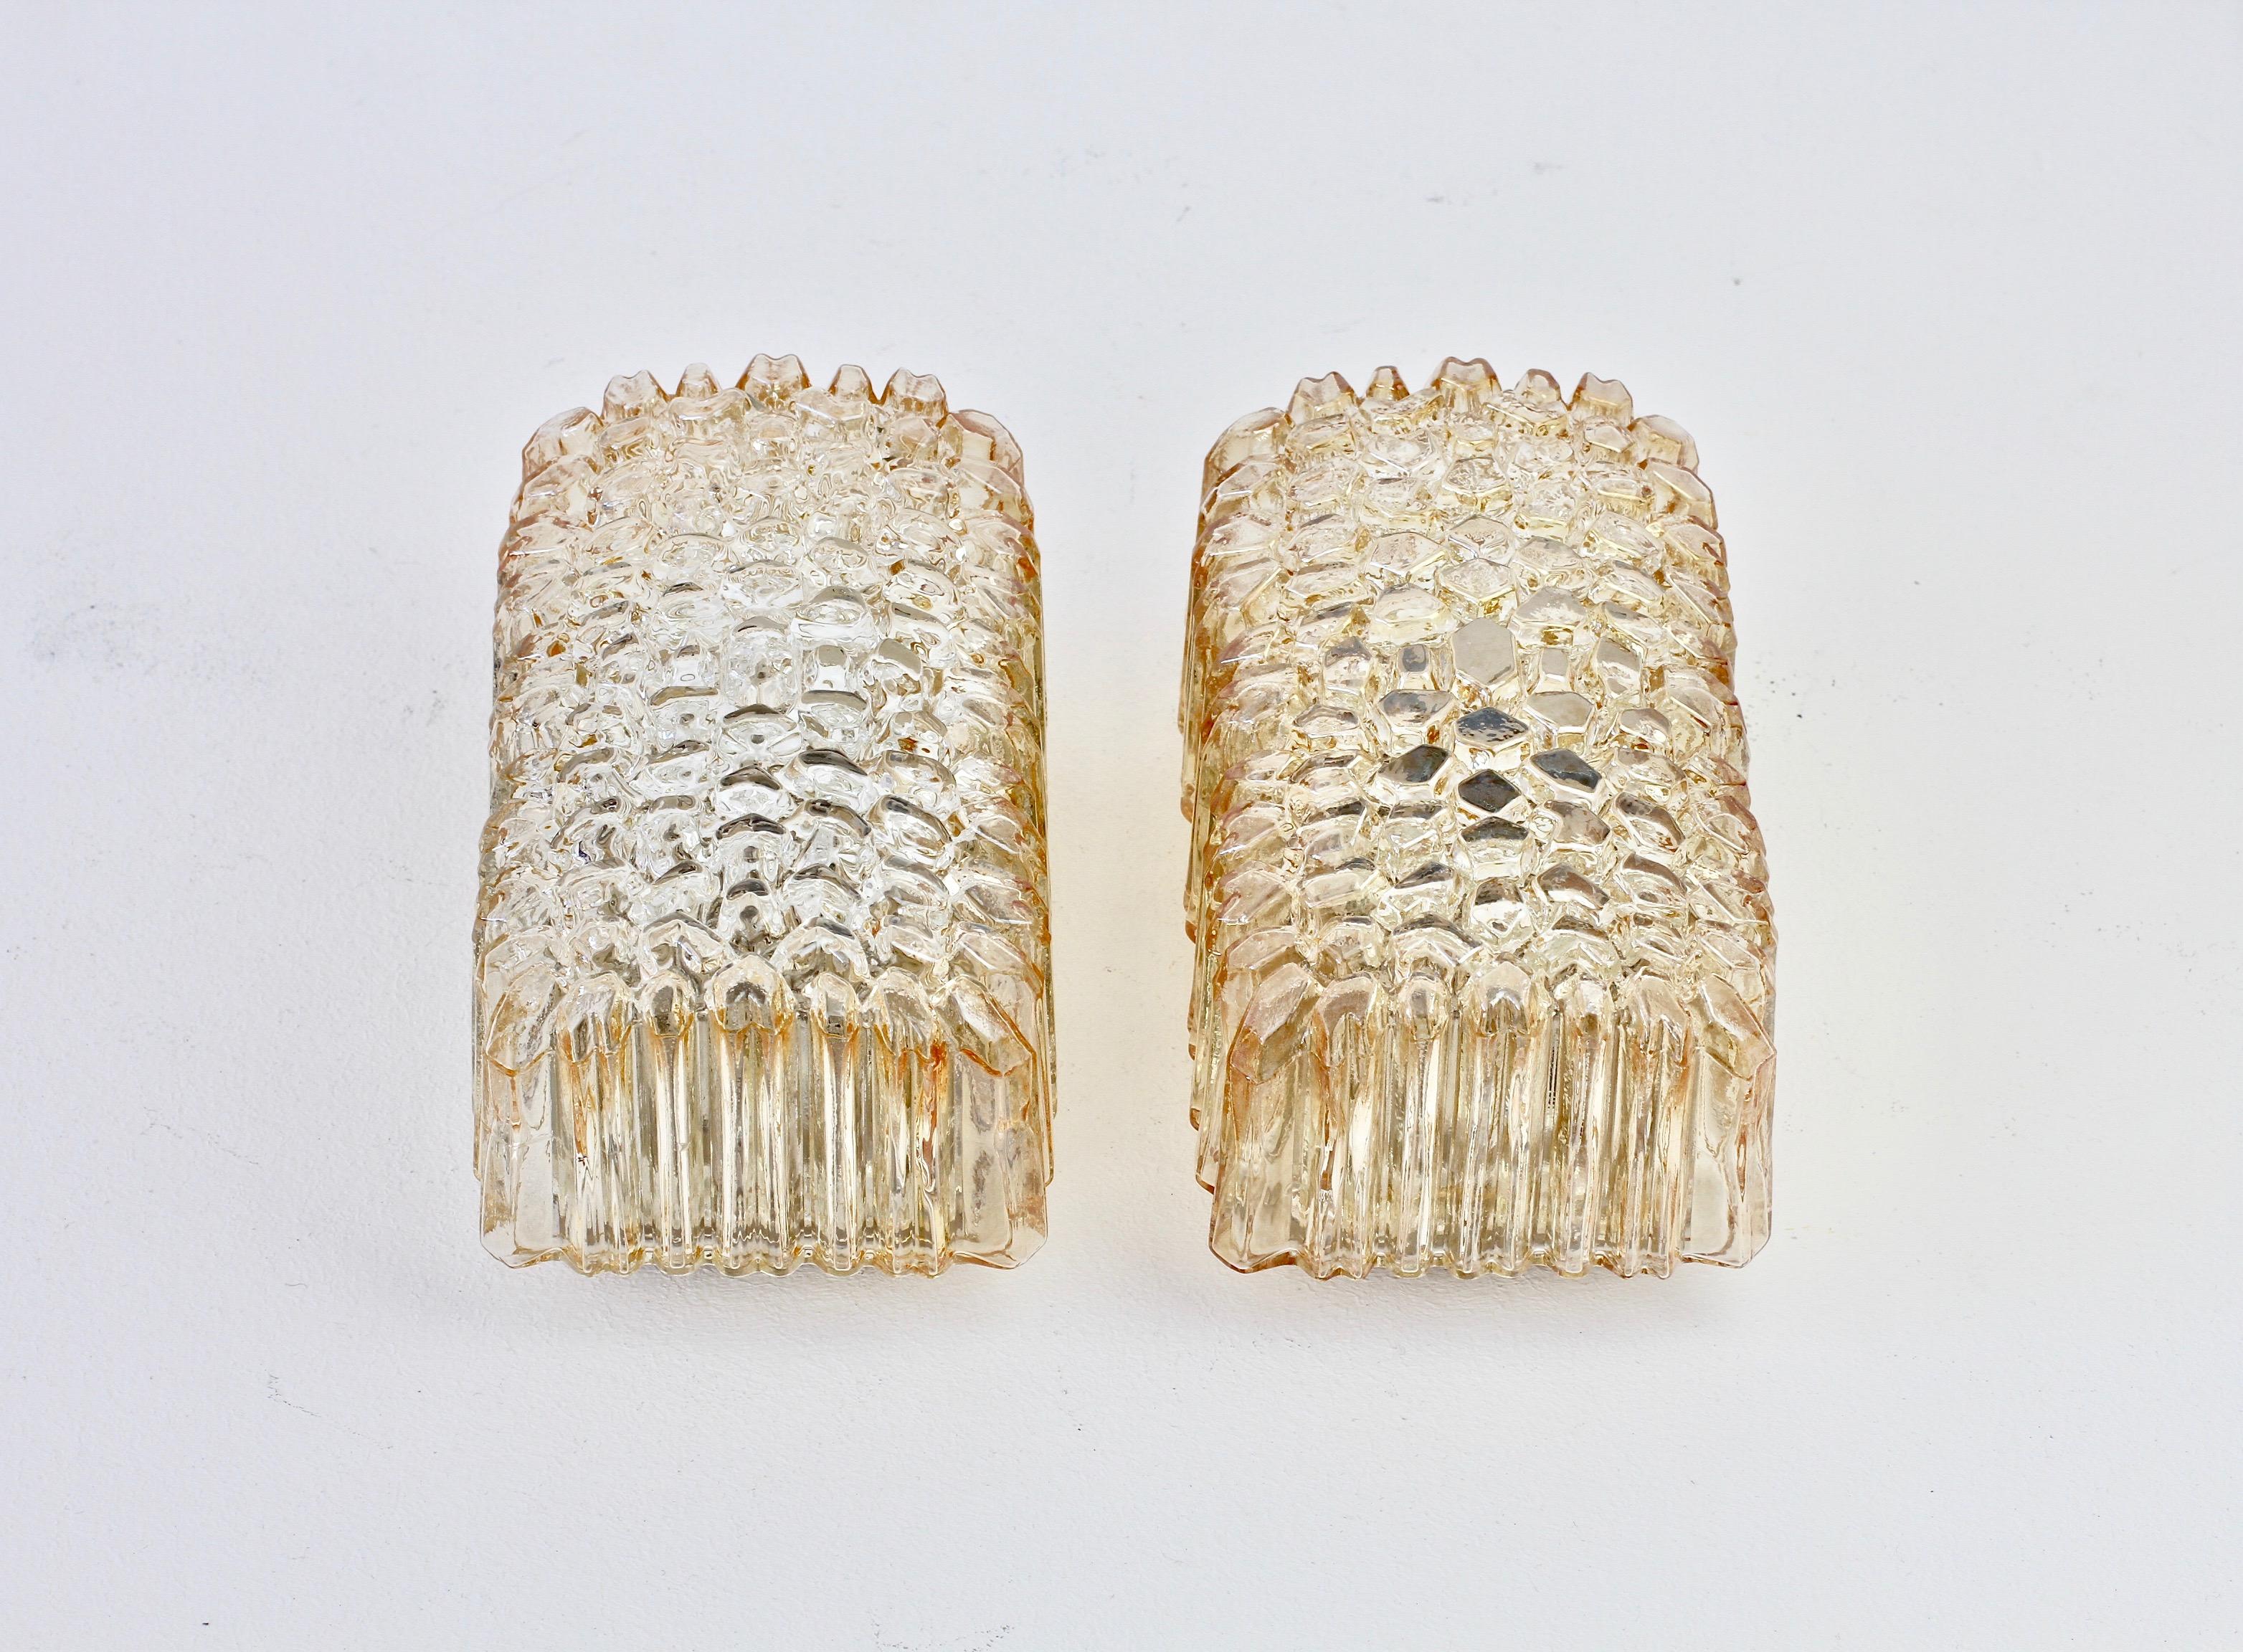 Molded Limburg Pair of Wall Lights 1970s Organic Textured Amber Toned Ice Glass Sconces